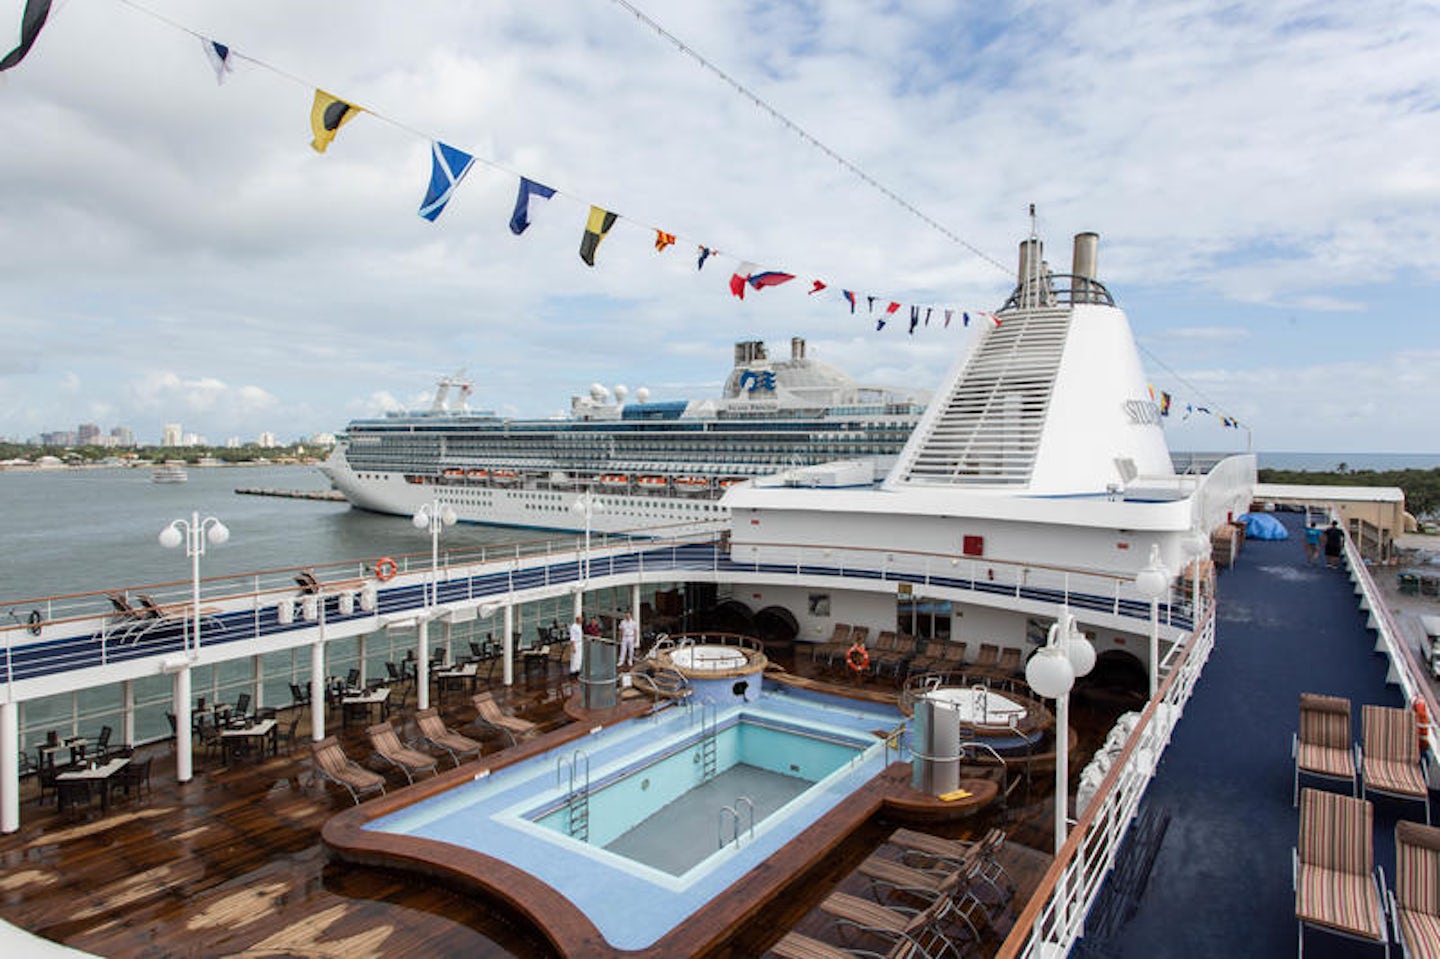 The Pool on Silver Whisper